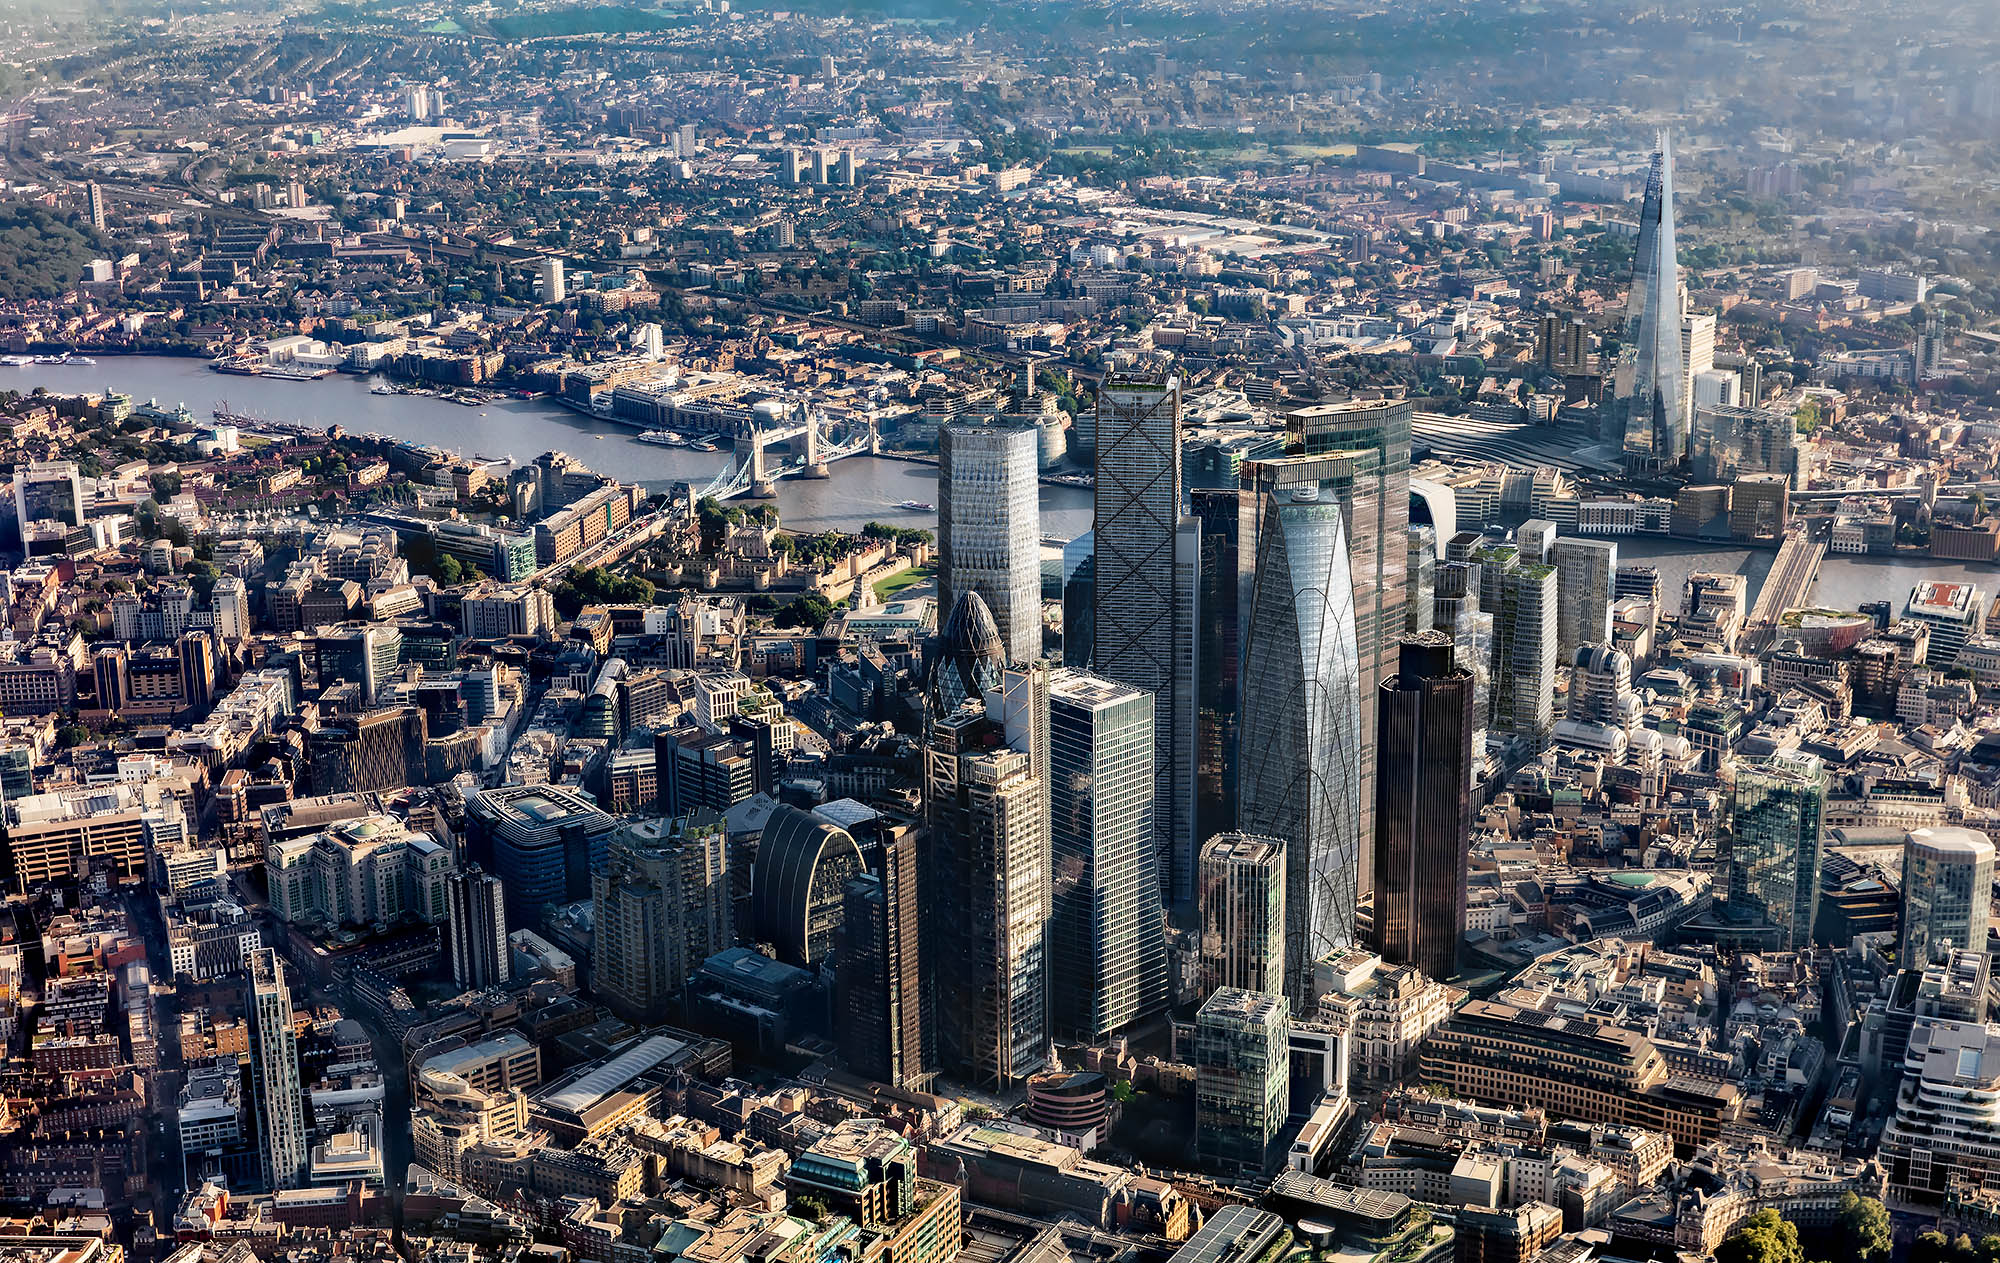 City of London approves new £600m skyscraper with 360 degree roof platform